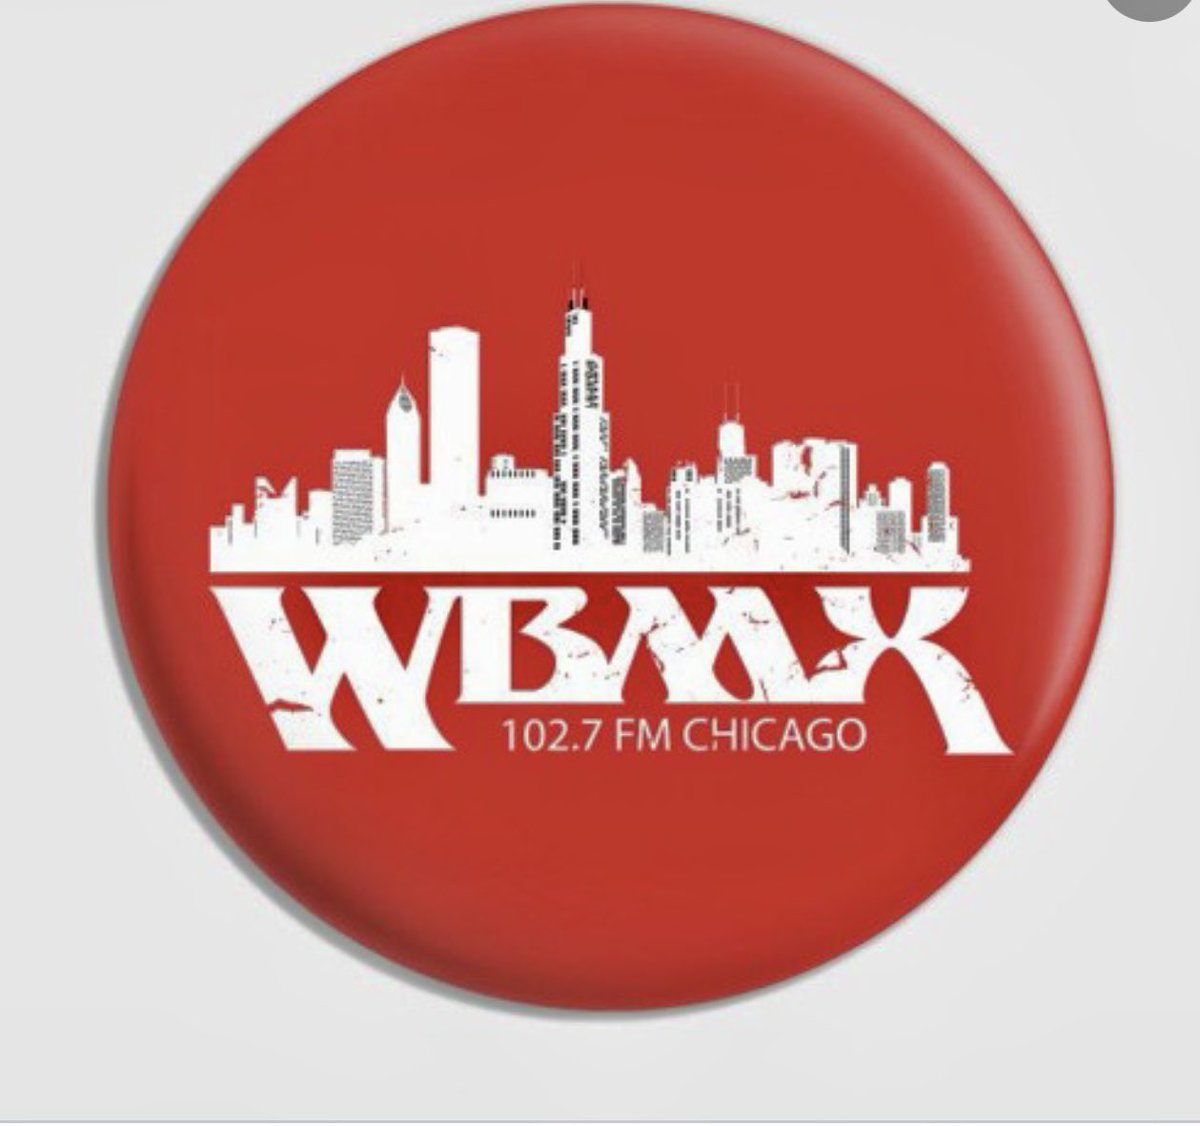 Who remembers listening to House Music on WBMX? #ChicagoHistory ☑️